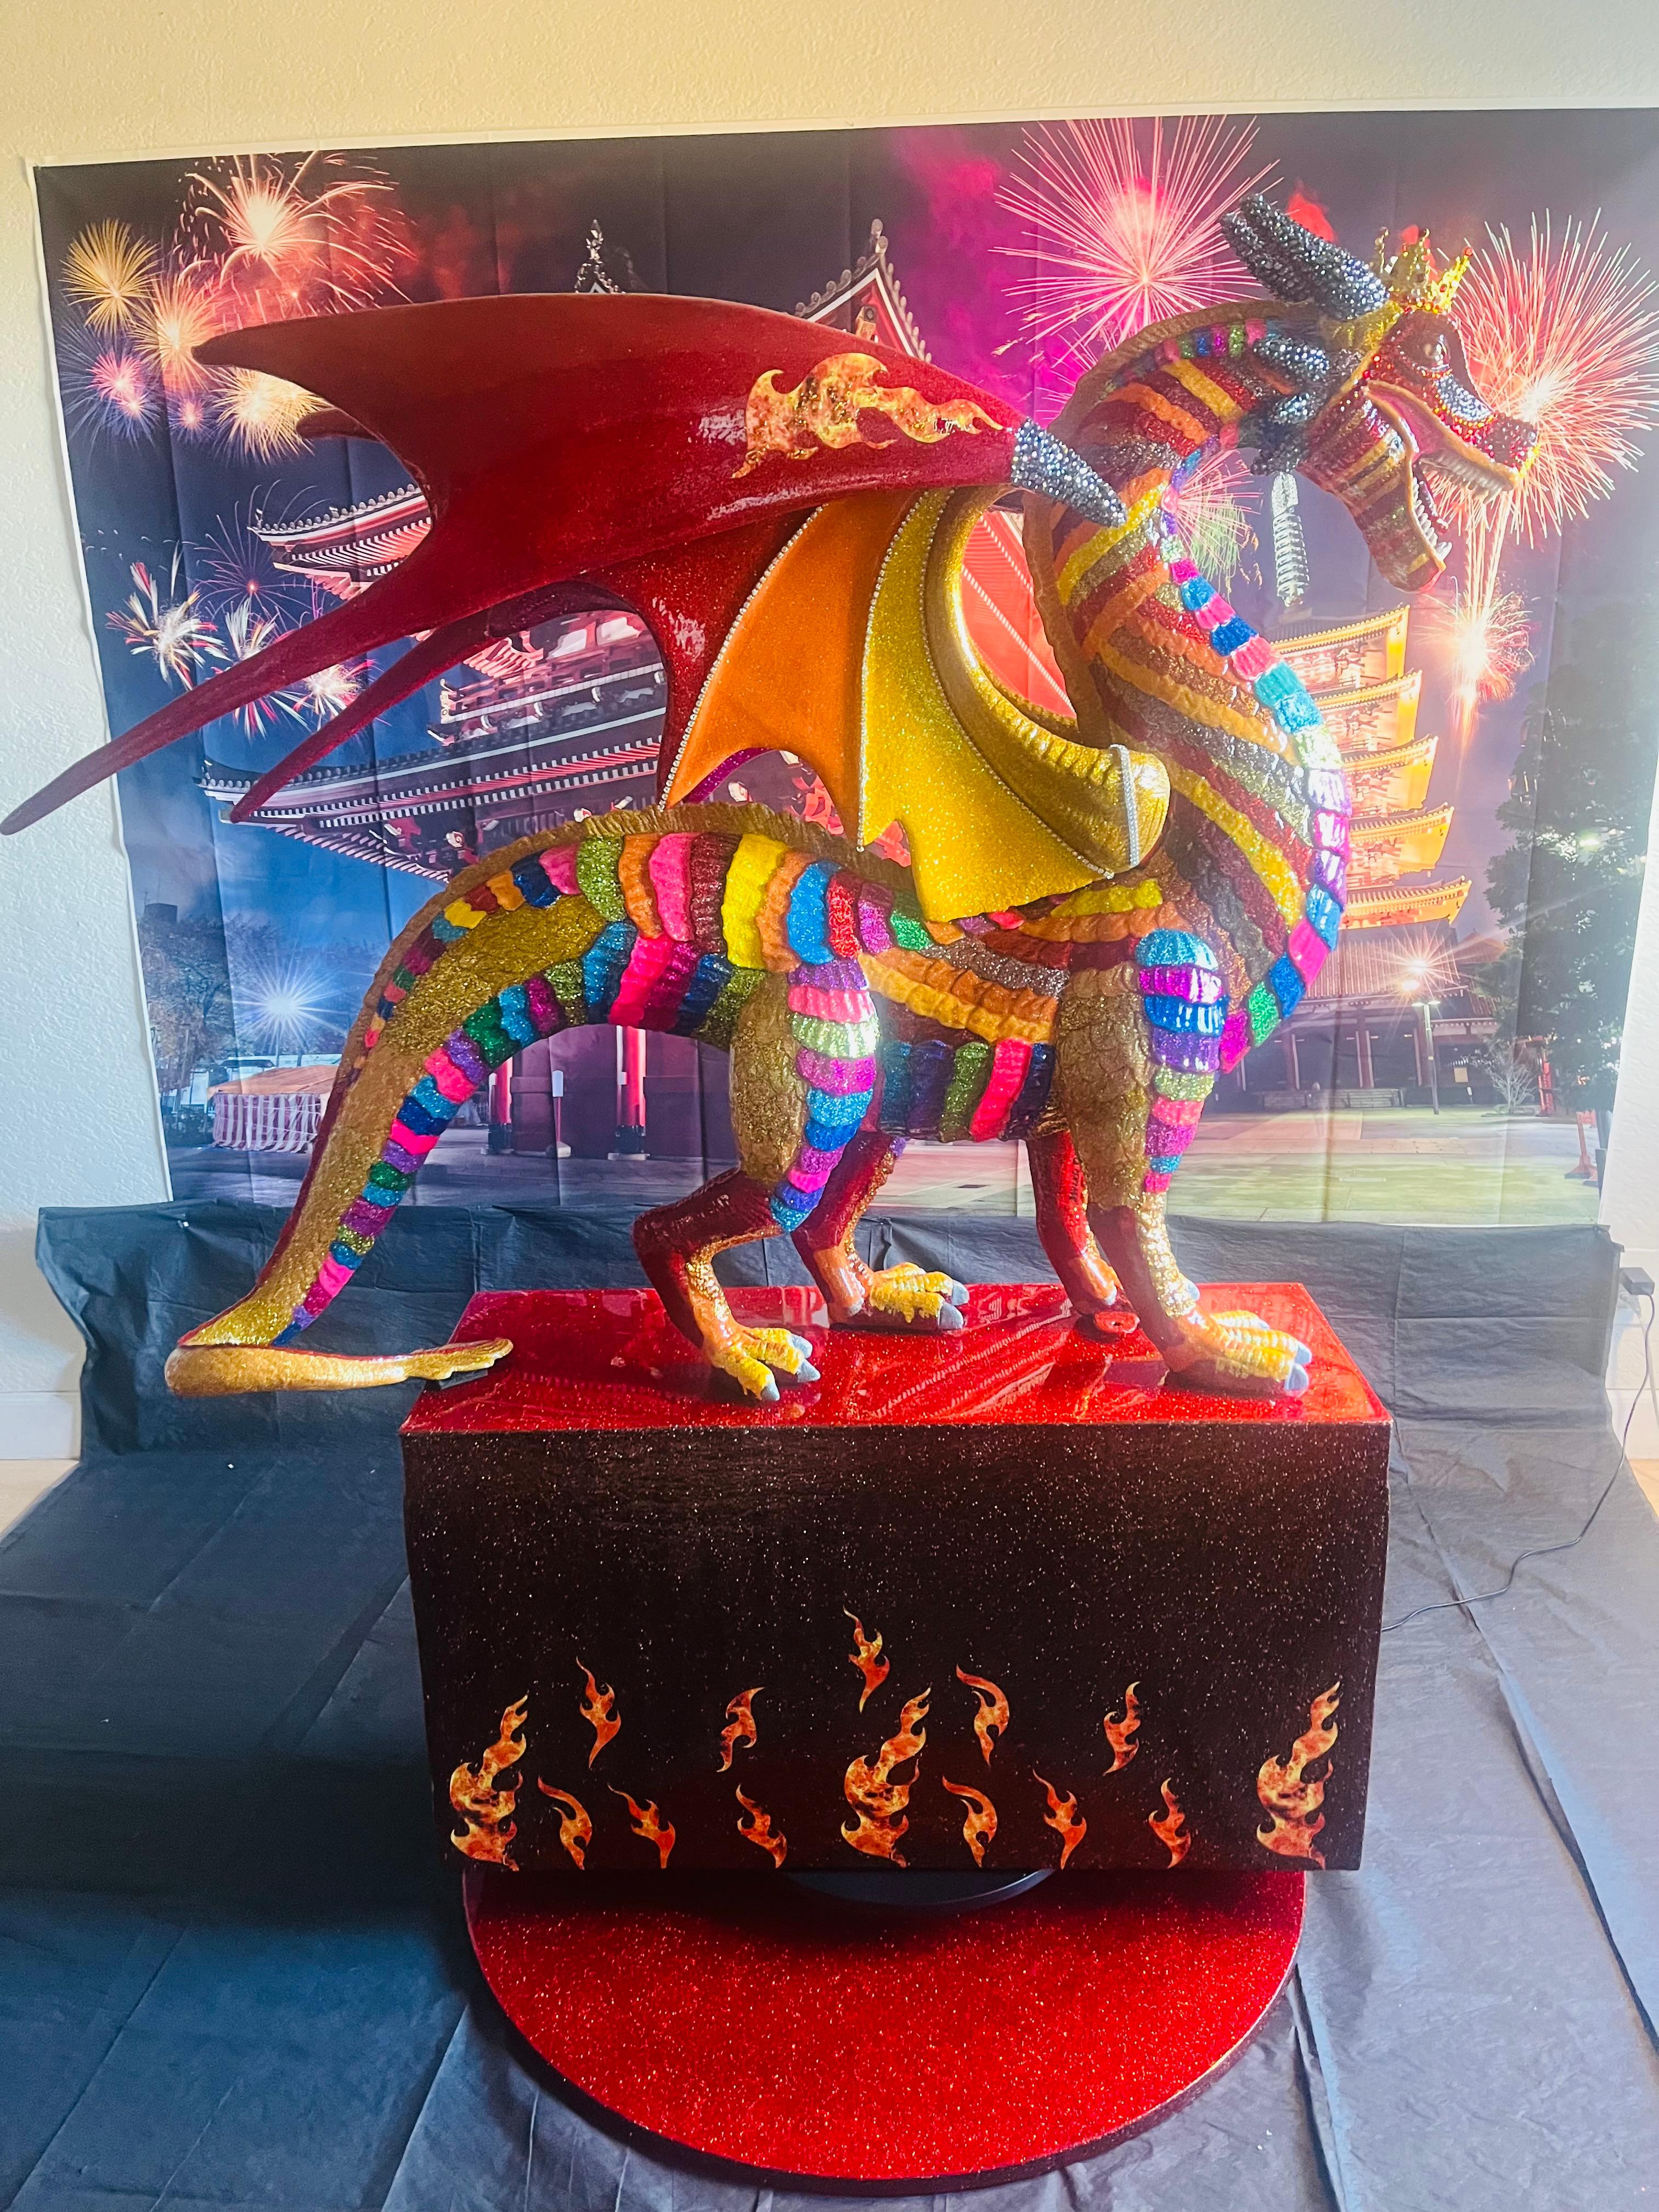 PRINCE BLAZE (The Official Dragon Prince Of 2024: The Year Of The Dragon) - Pop Art Sculpture by Mauro Oliveira